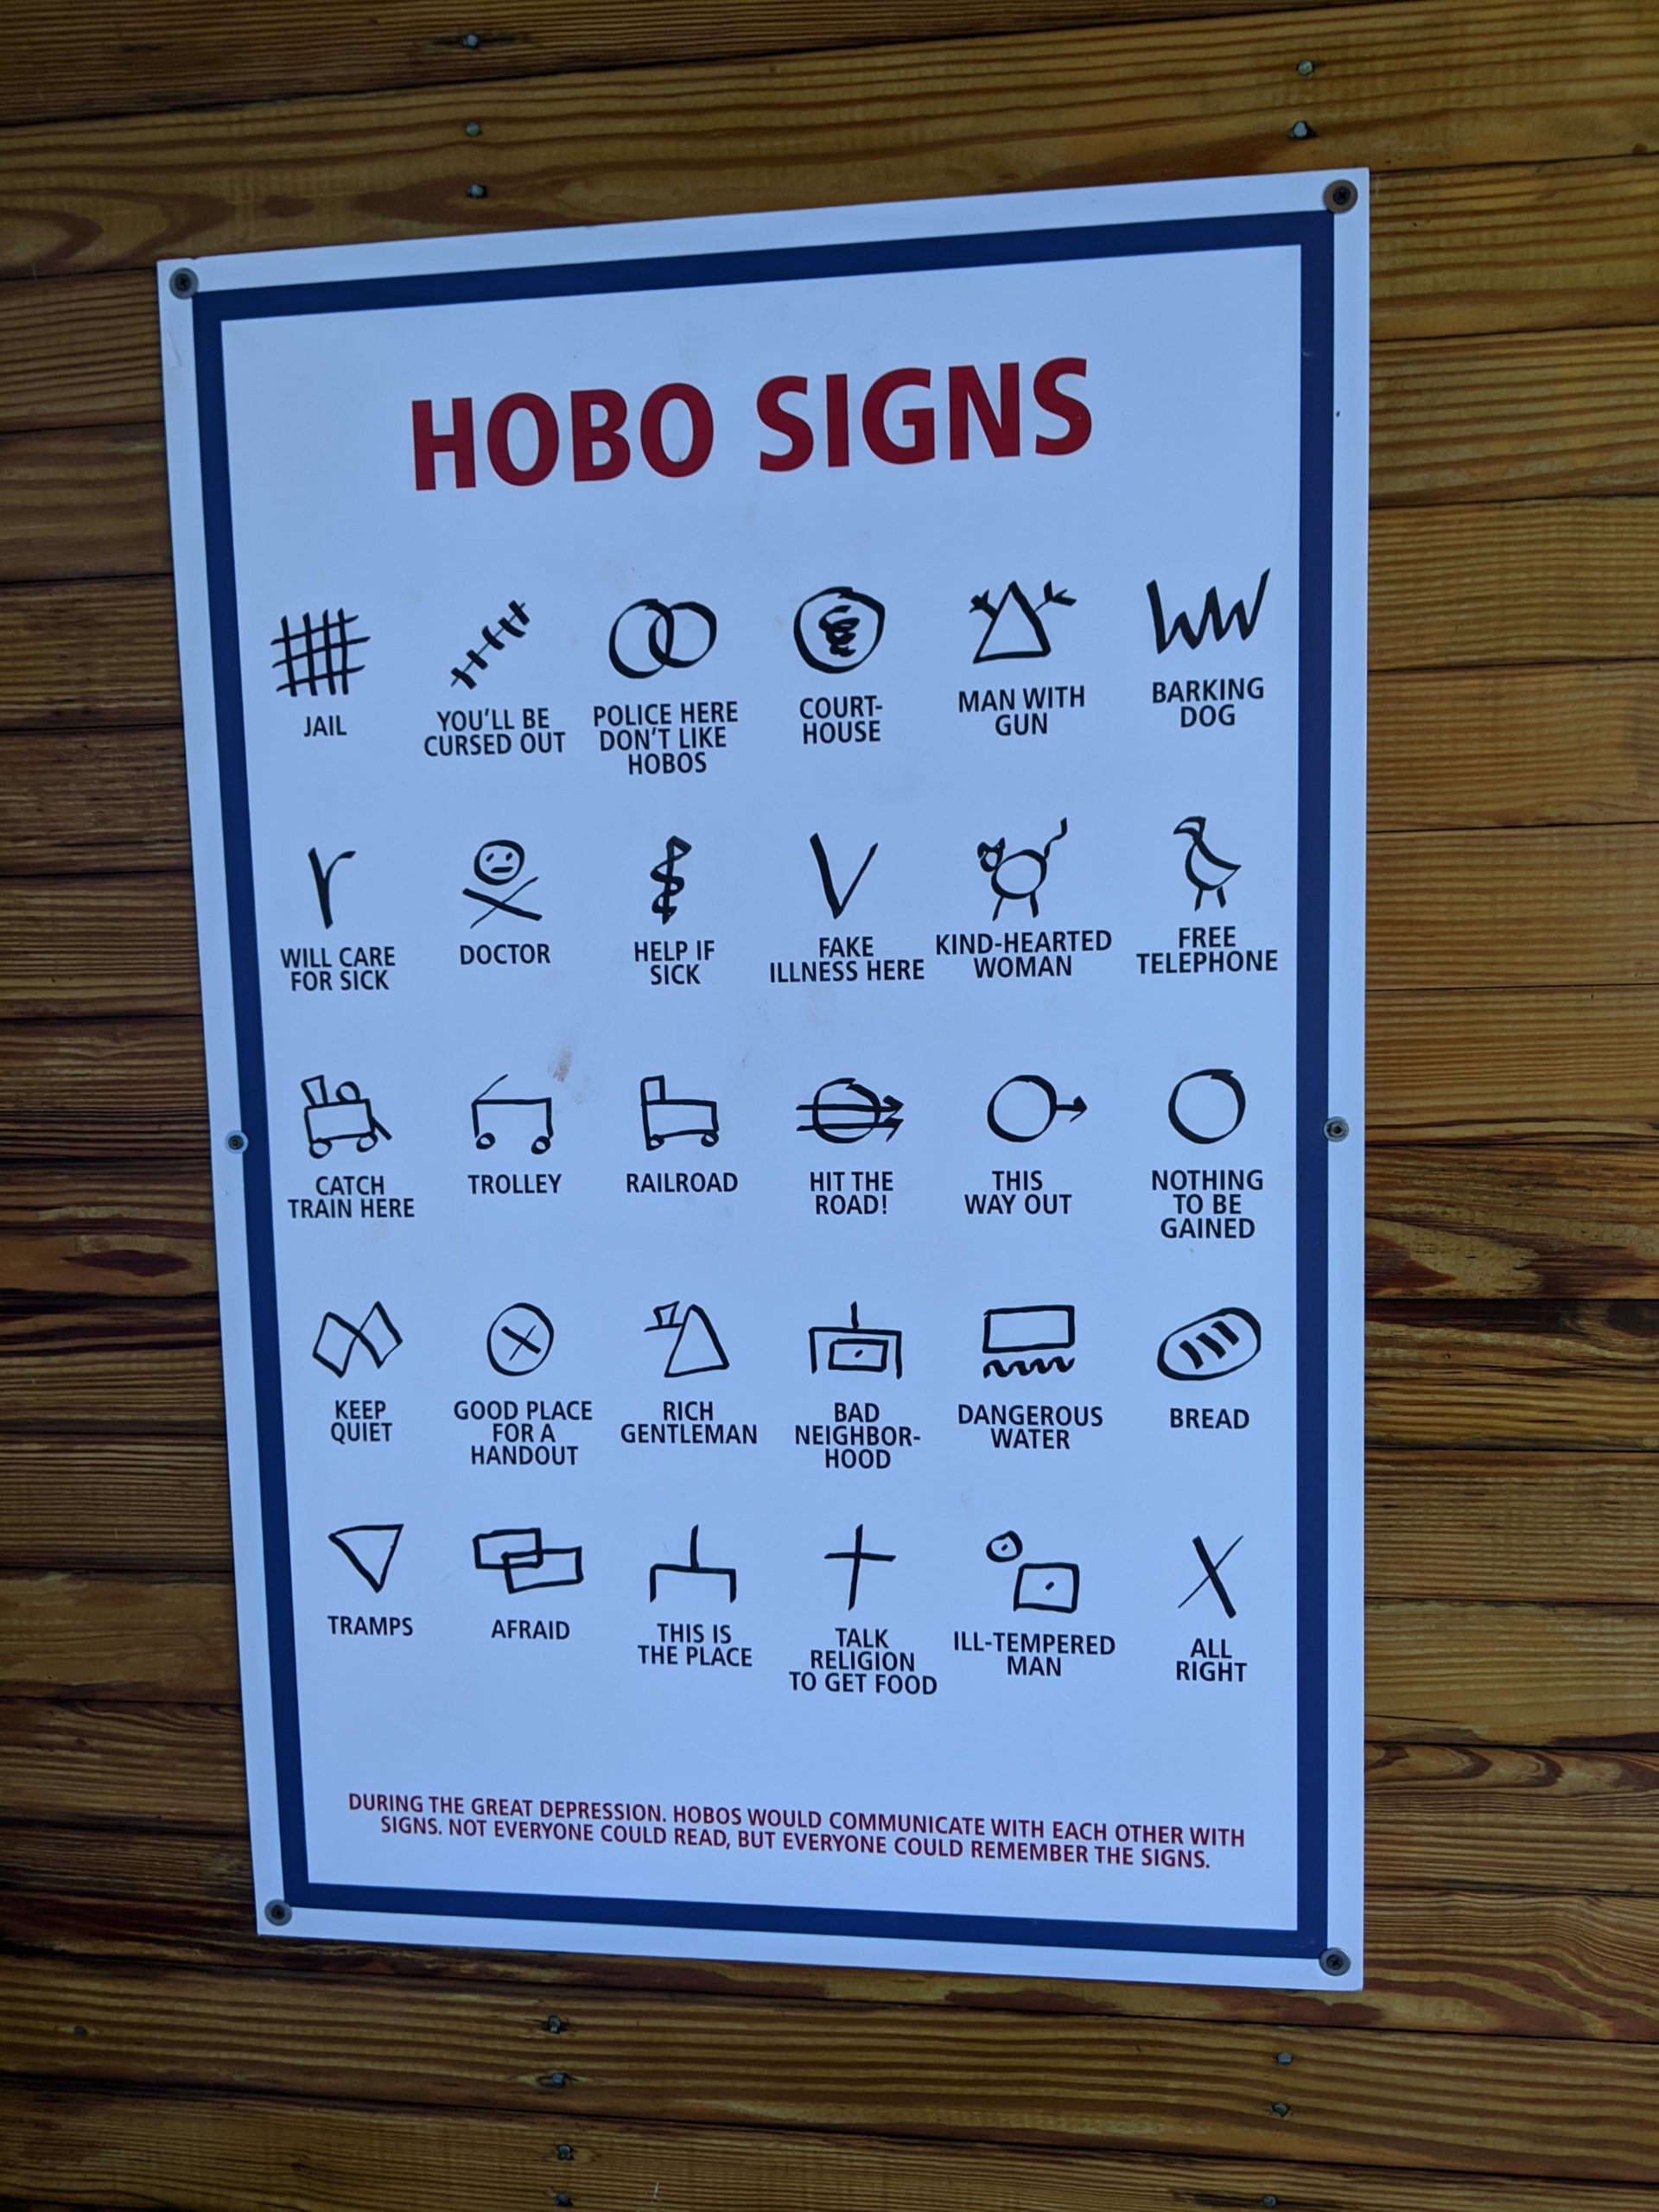 This+sign+of+hobo+symbols+at+railroad+museum